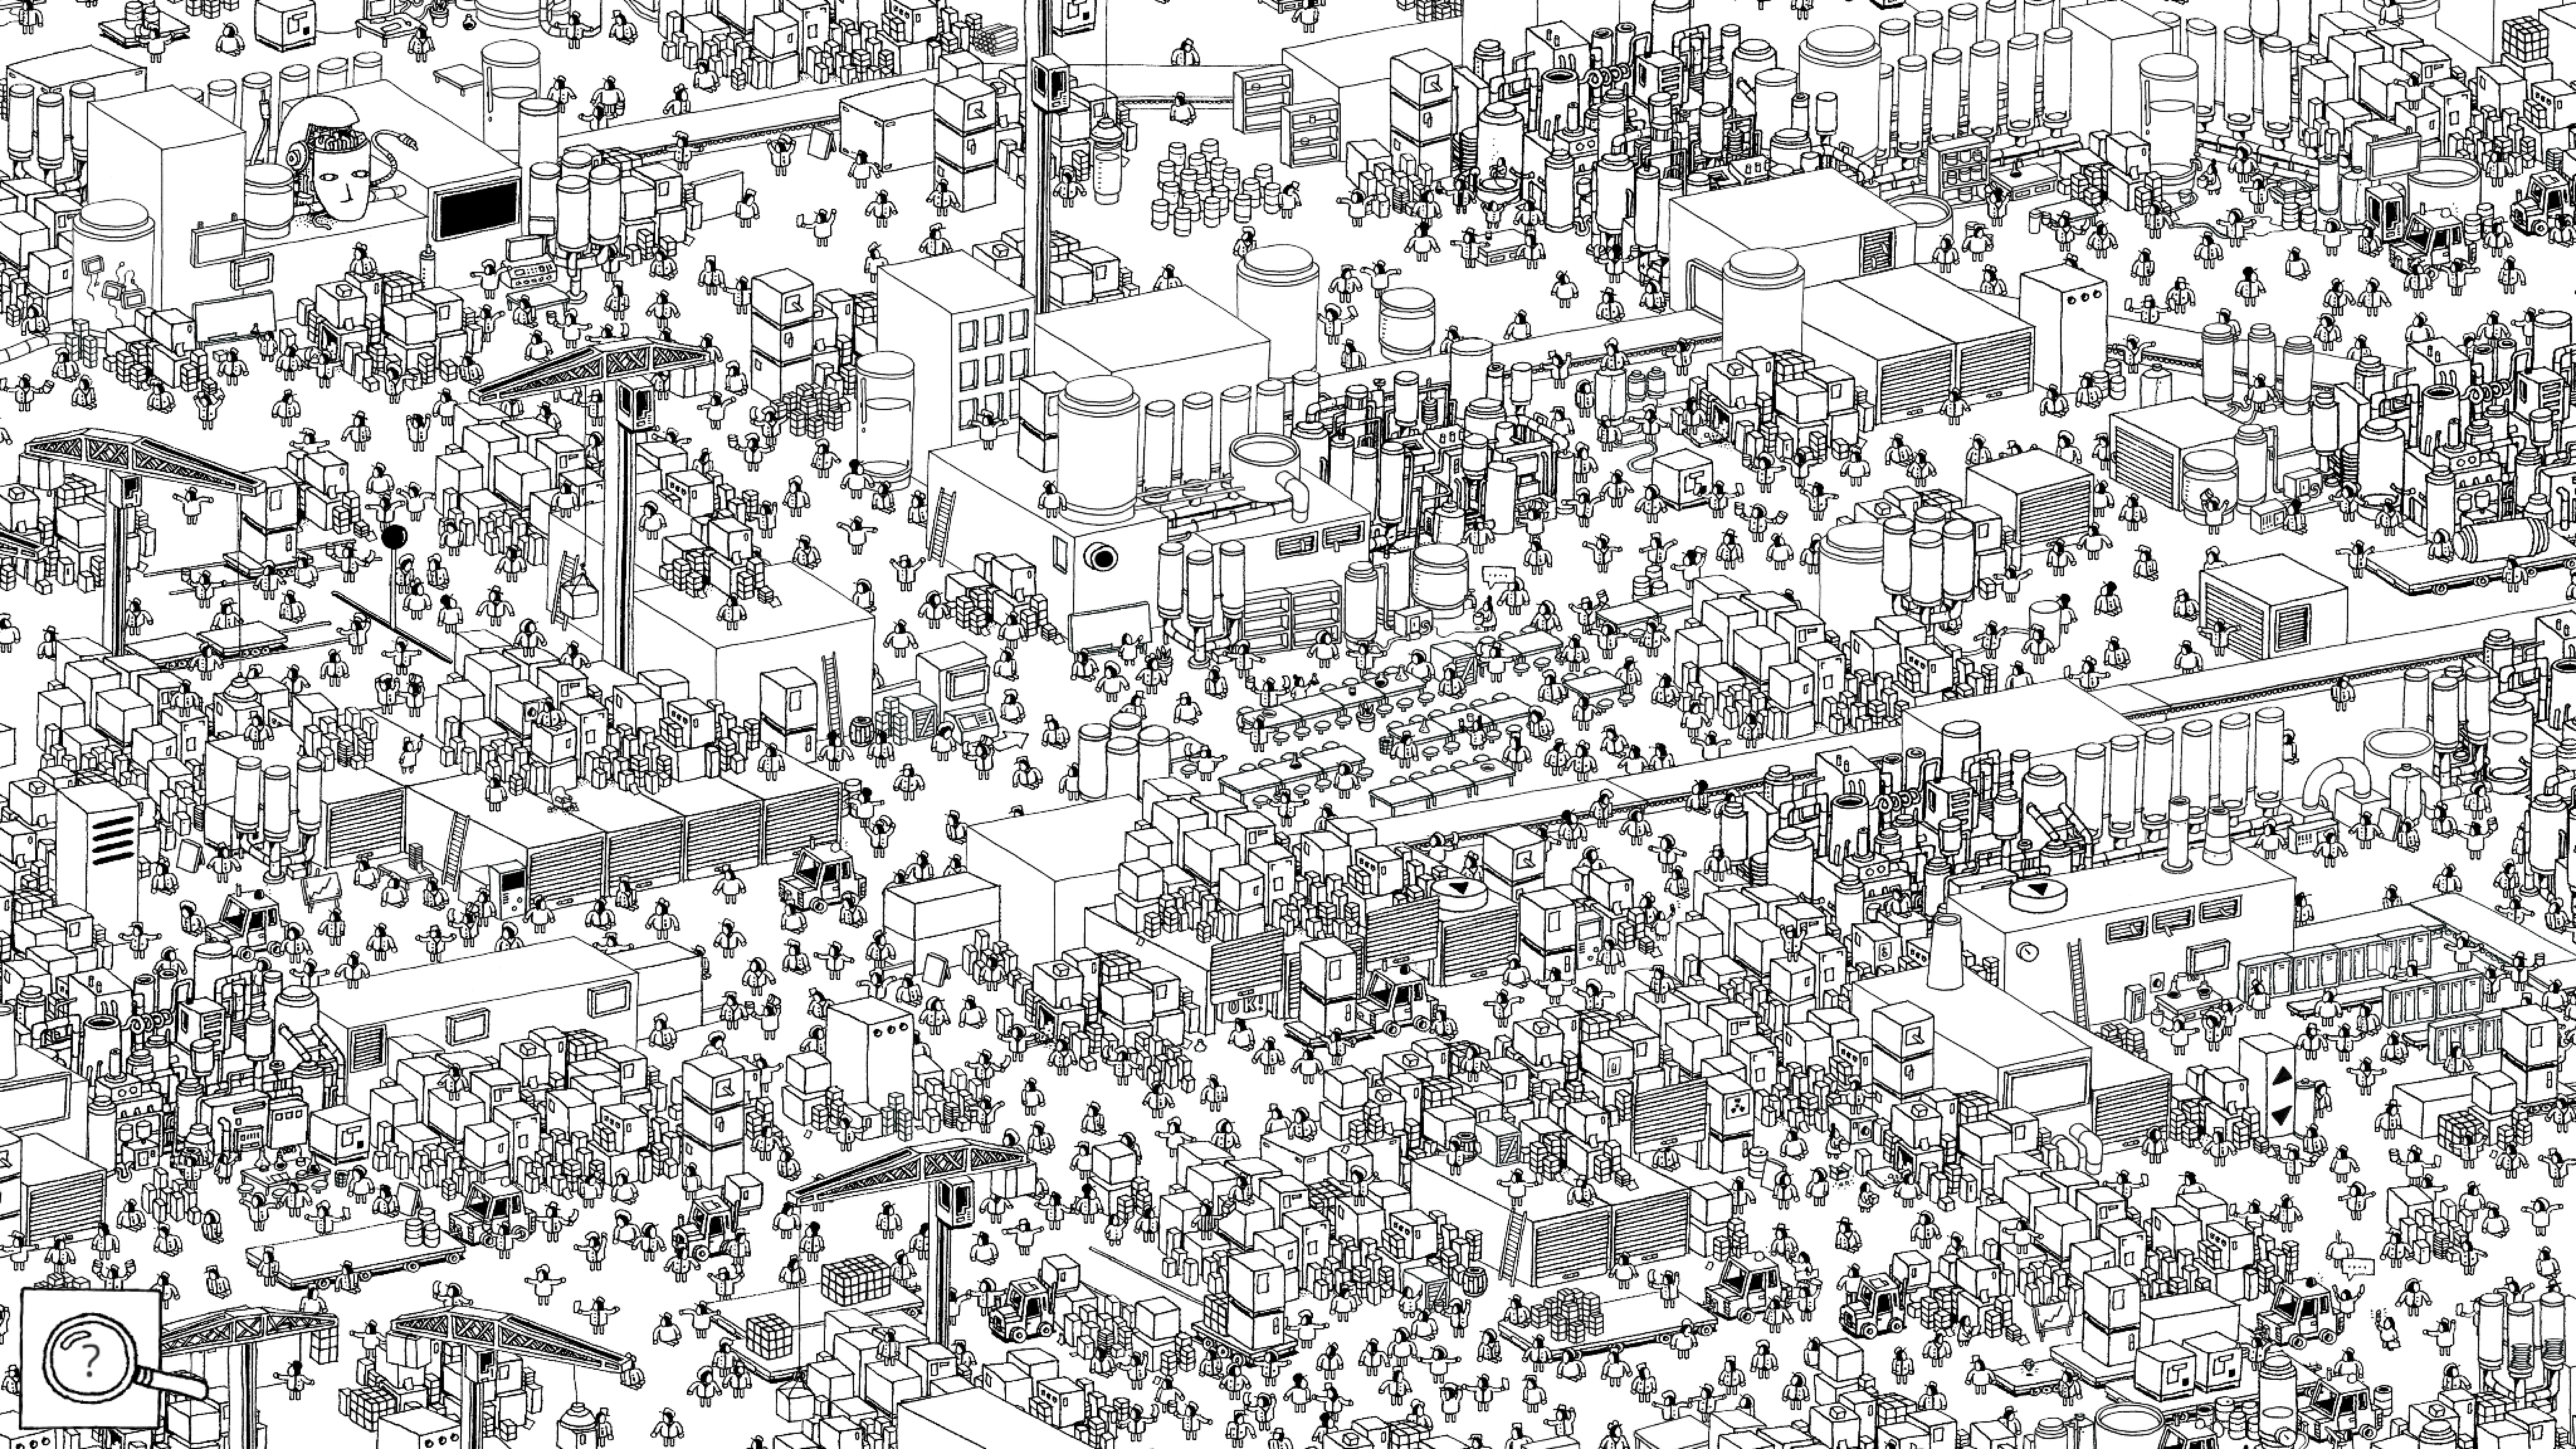 Download If you love adult coloring books, you'll enjoy 'Hidden Folks' | Engadget